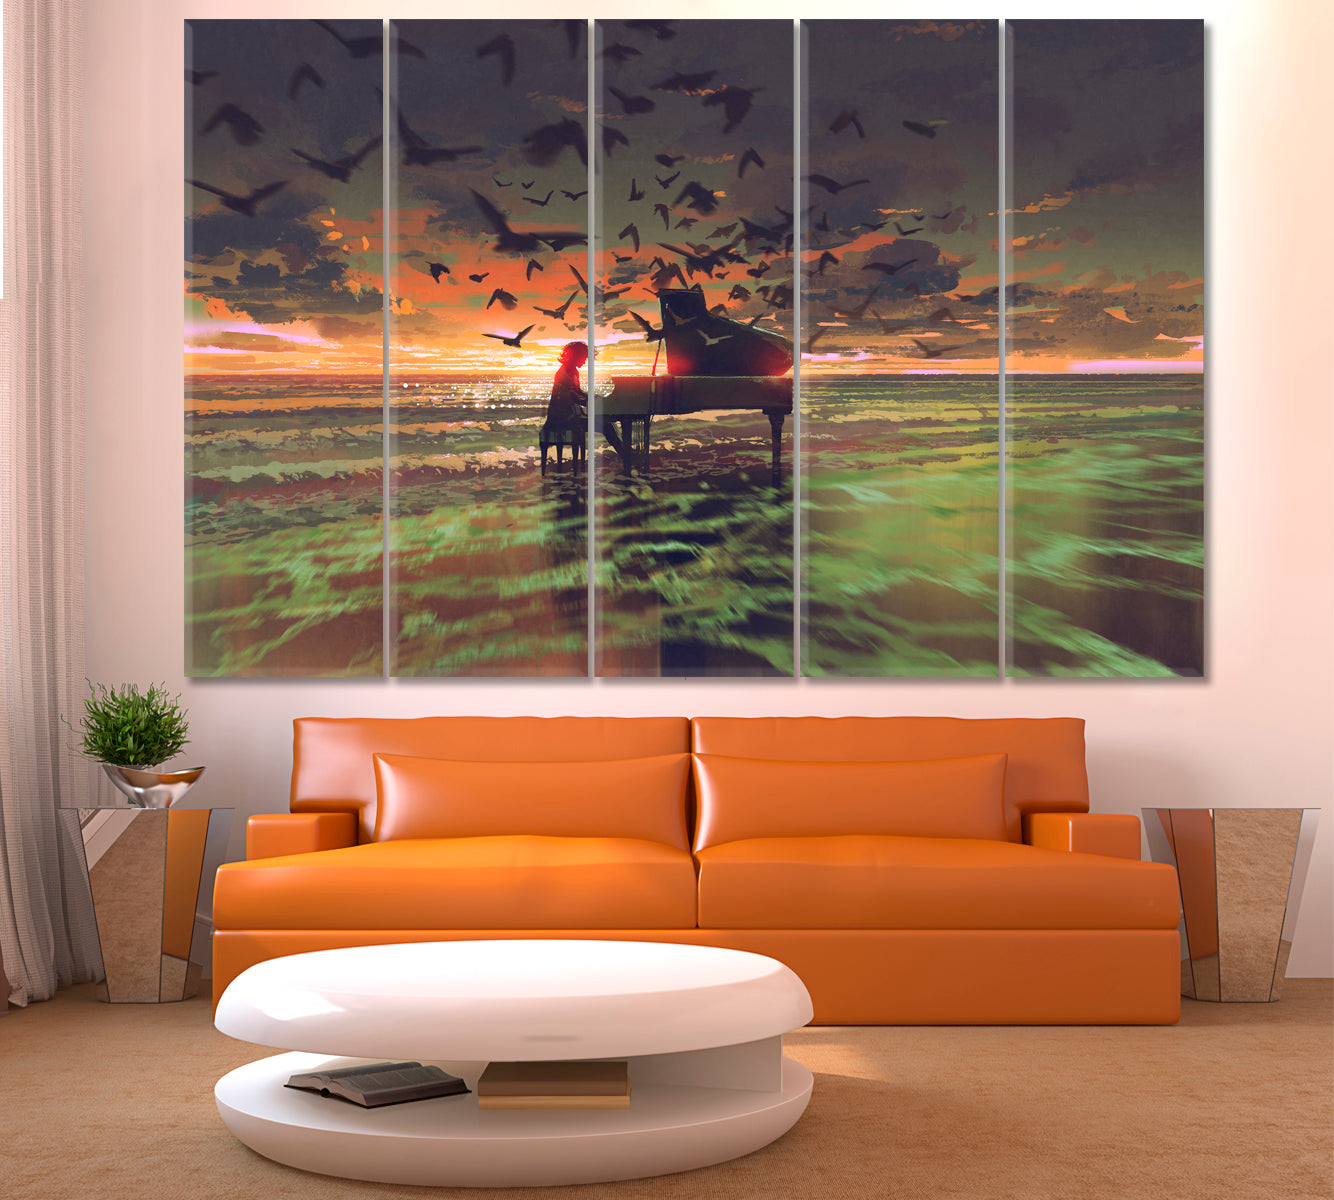 FANTASY Pianist On The Ocean Stunning Unique Mysterious Surreal Fantasy Large Art Print Décor Artesty 5 panels 36" x 24" 